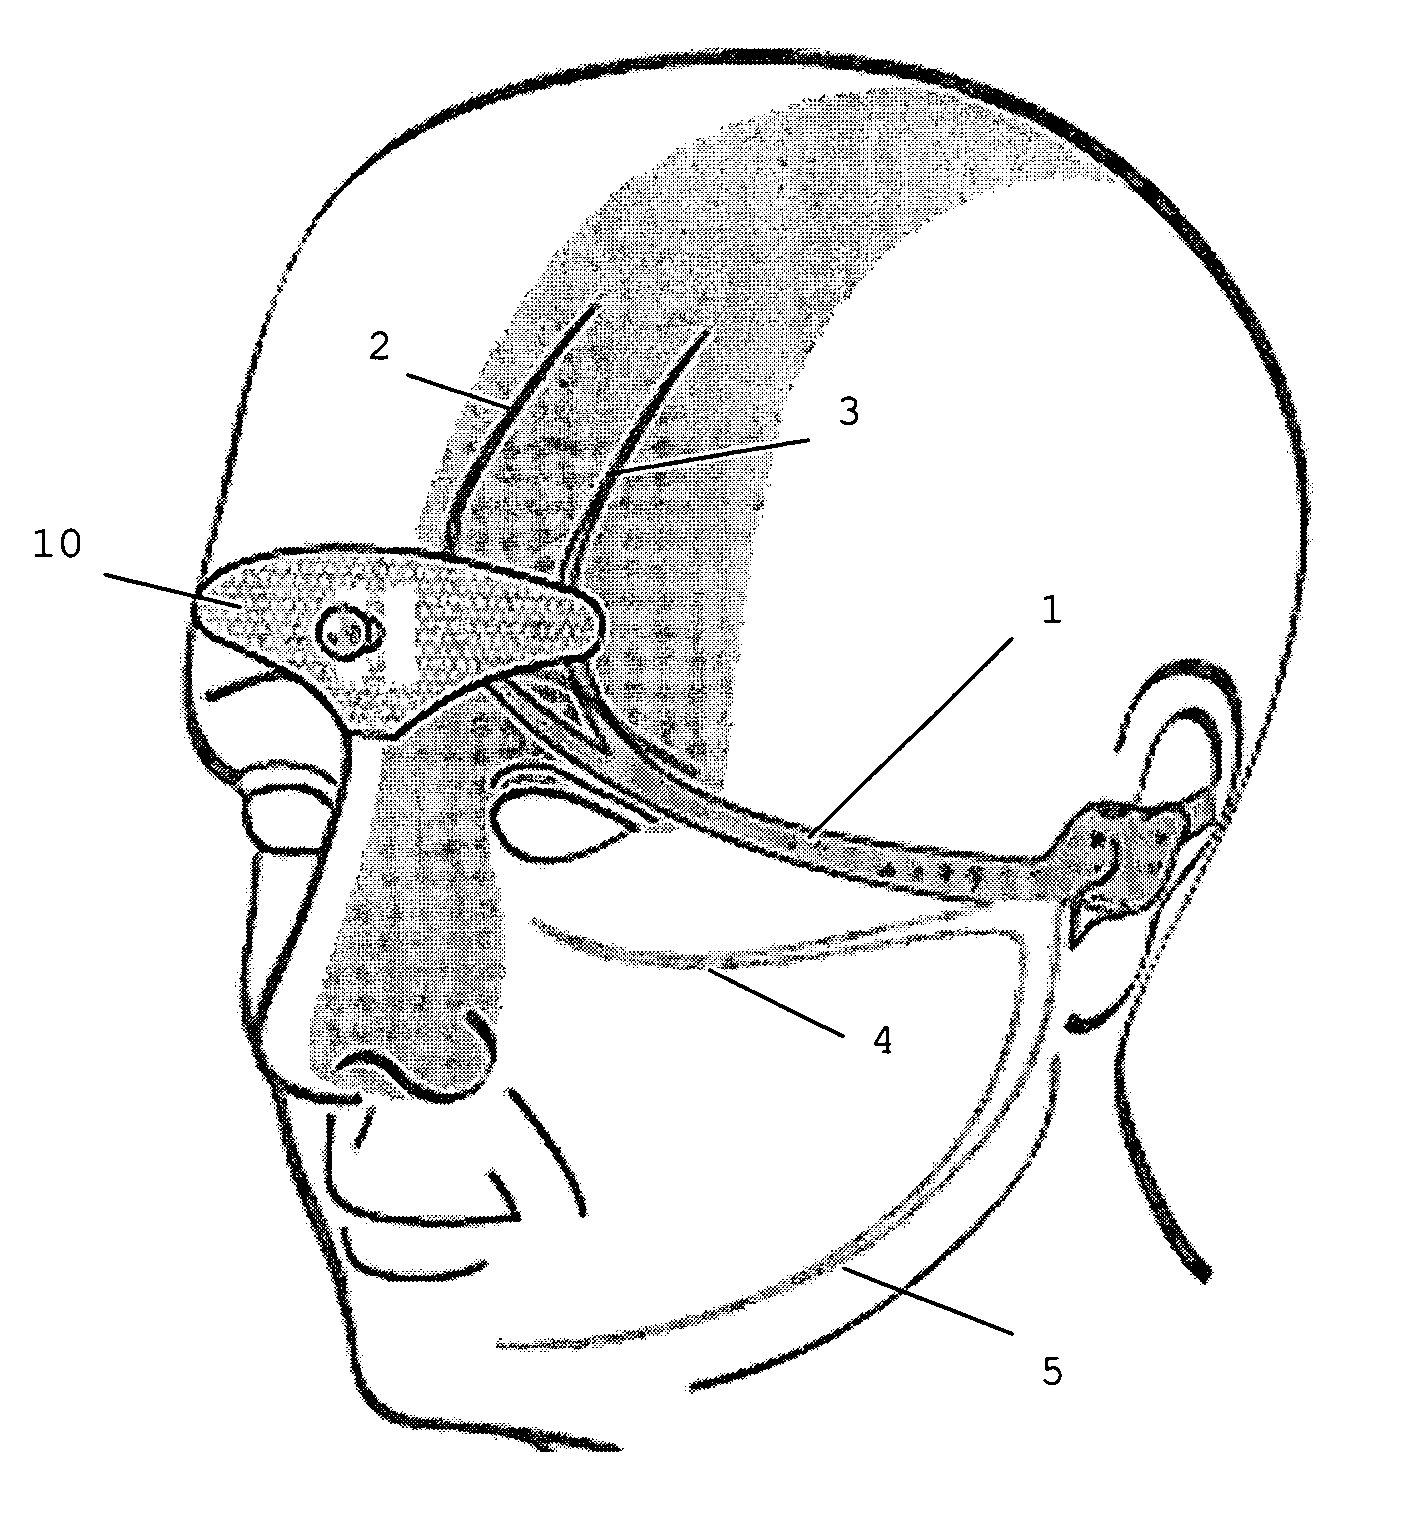 Device for the electrotherapeutic treatment of tension headaches